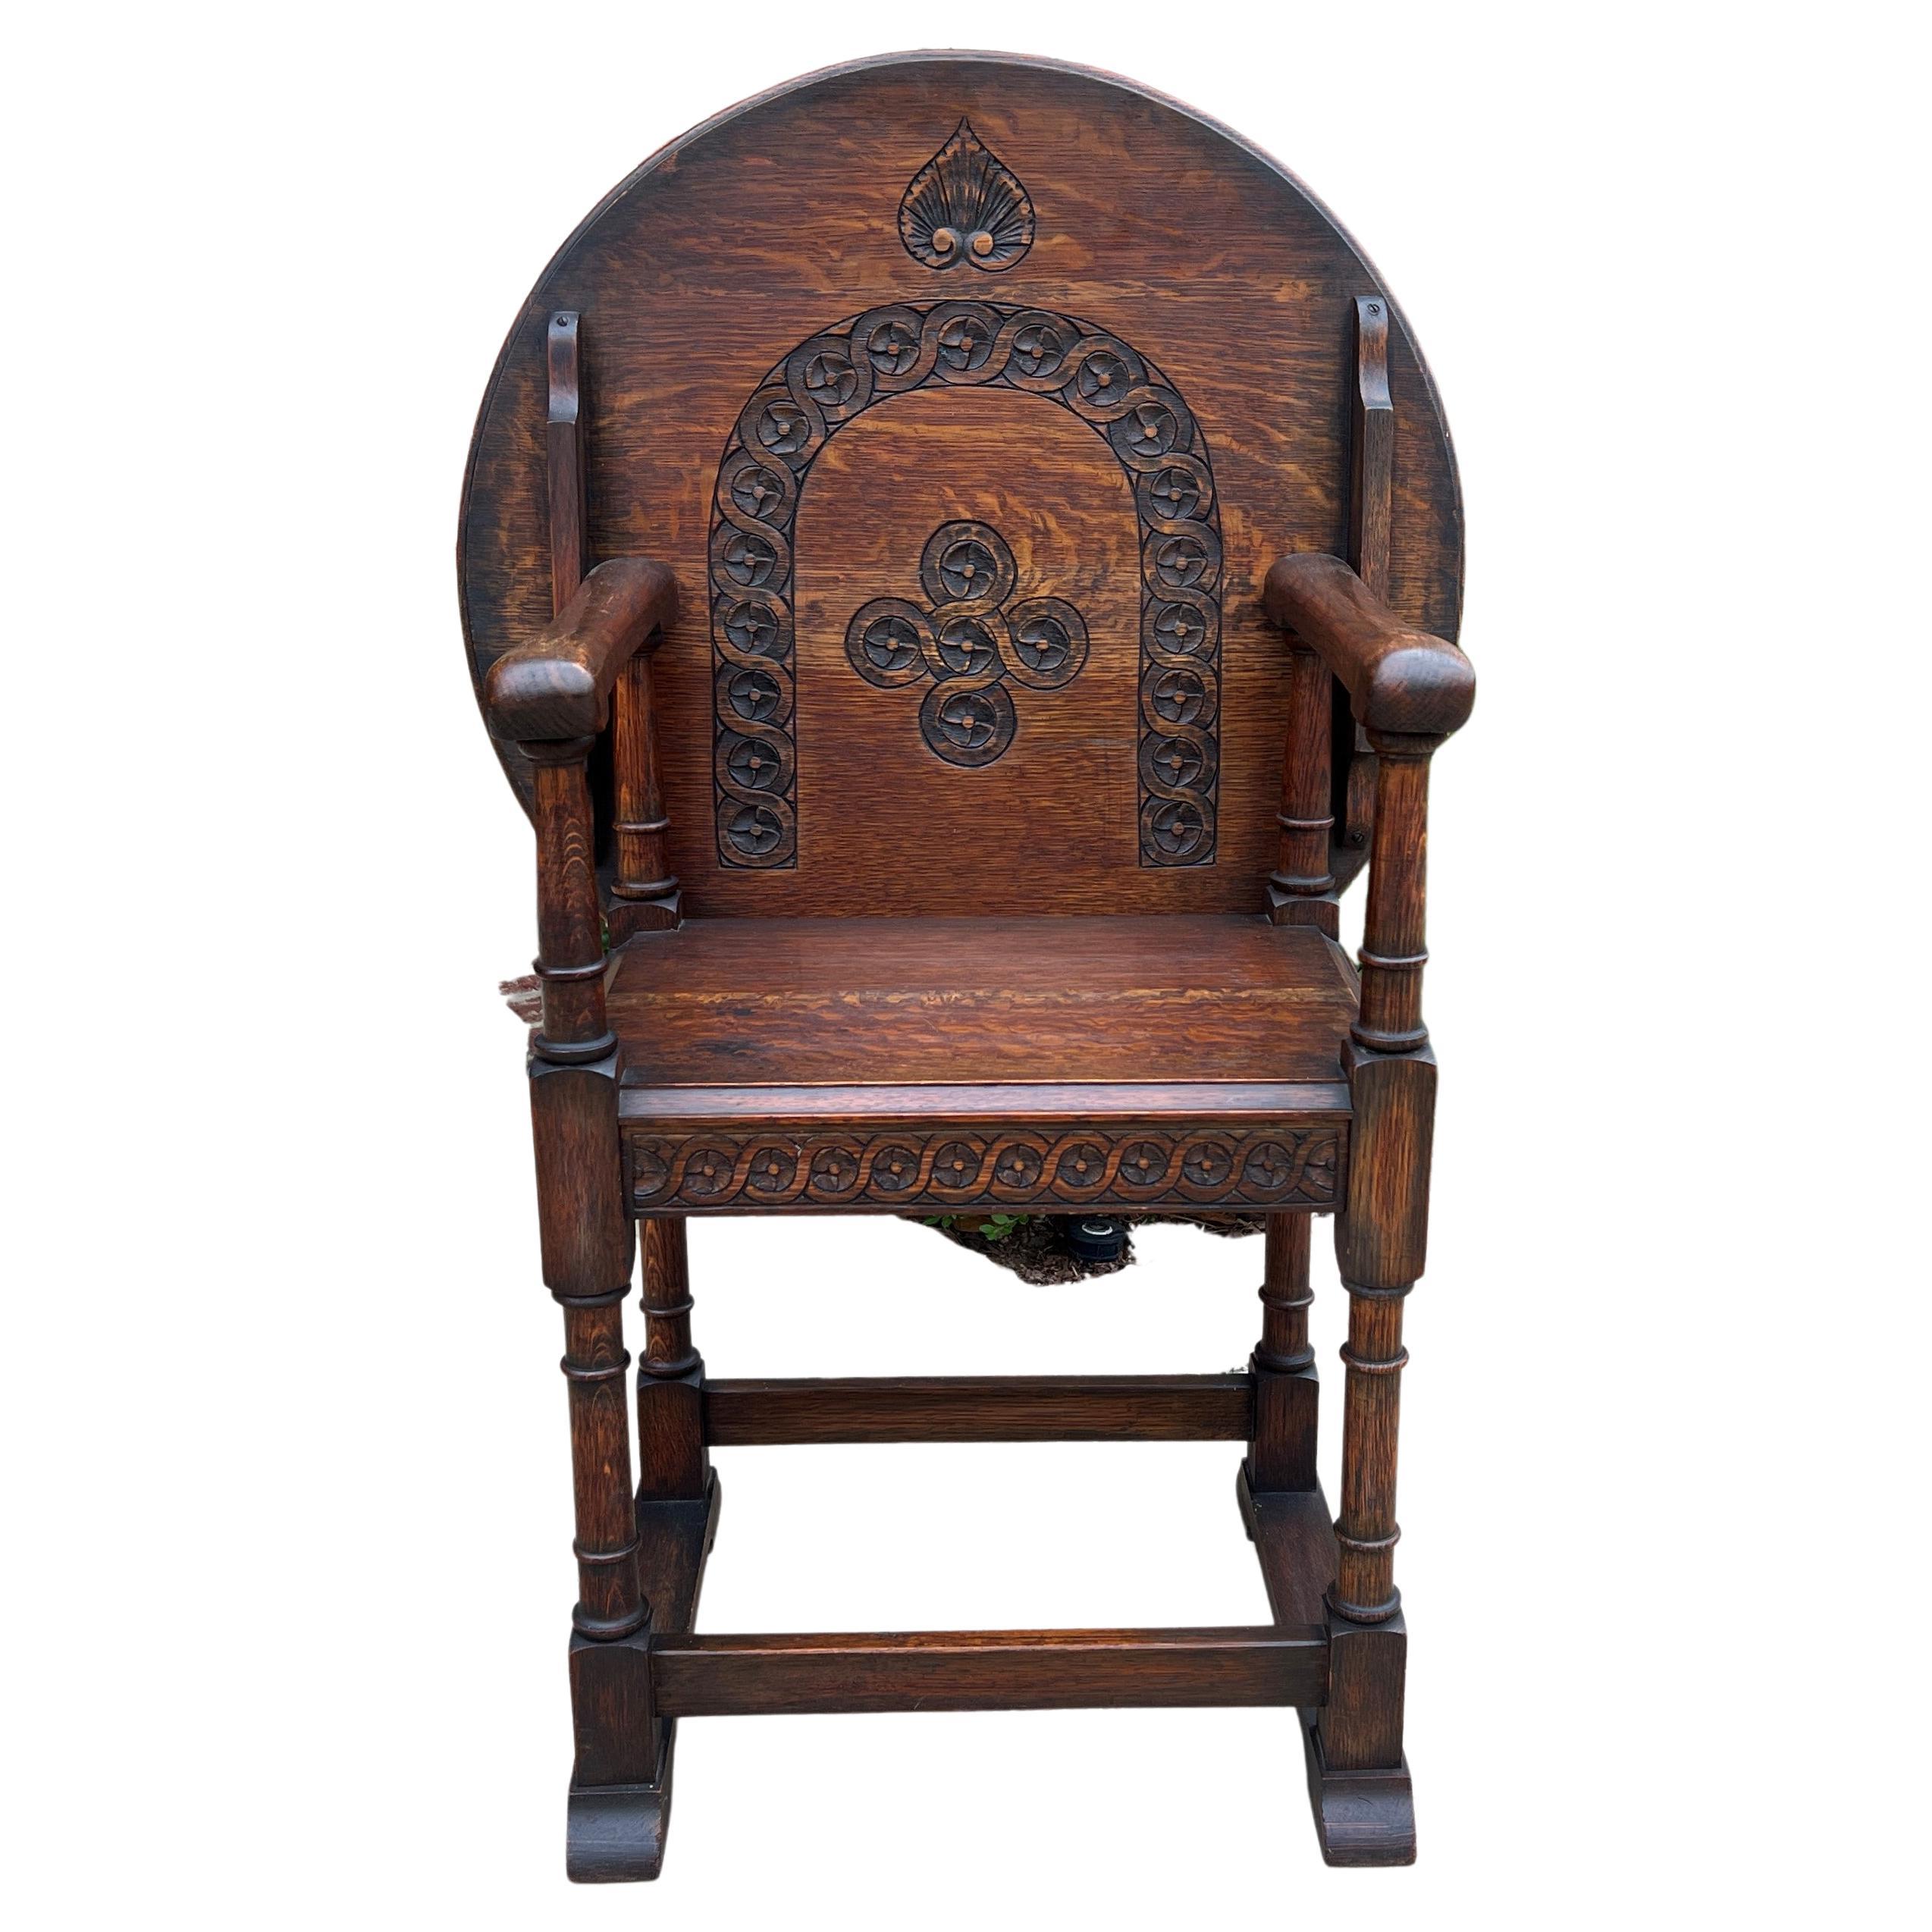 Antique English Monk's Chair Bench Oak Converts to Folding Table Round 19th C